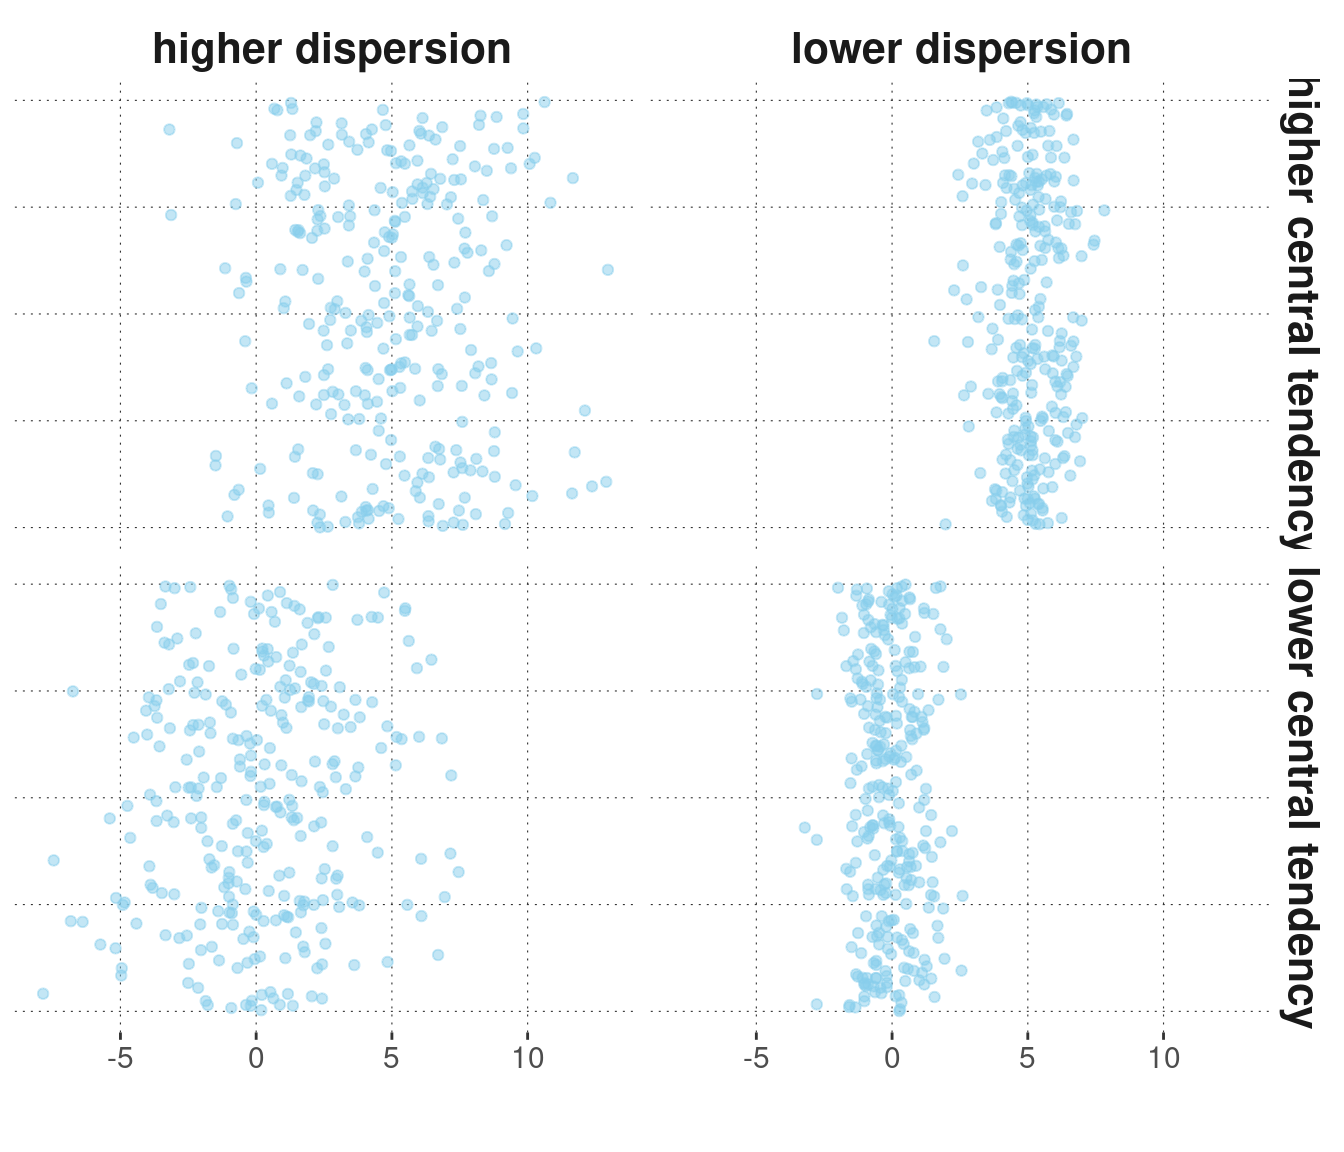 Fictitious data points with higher/lower central tendencies and higher/lower dispersion. NB: The points are 'jittered' along the vertical dimension for better visibility; only the horizontal dimension is relevant here.